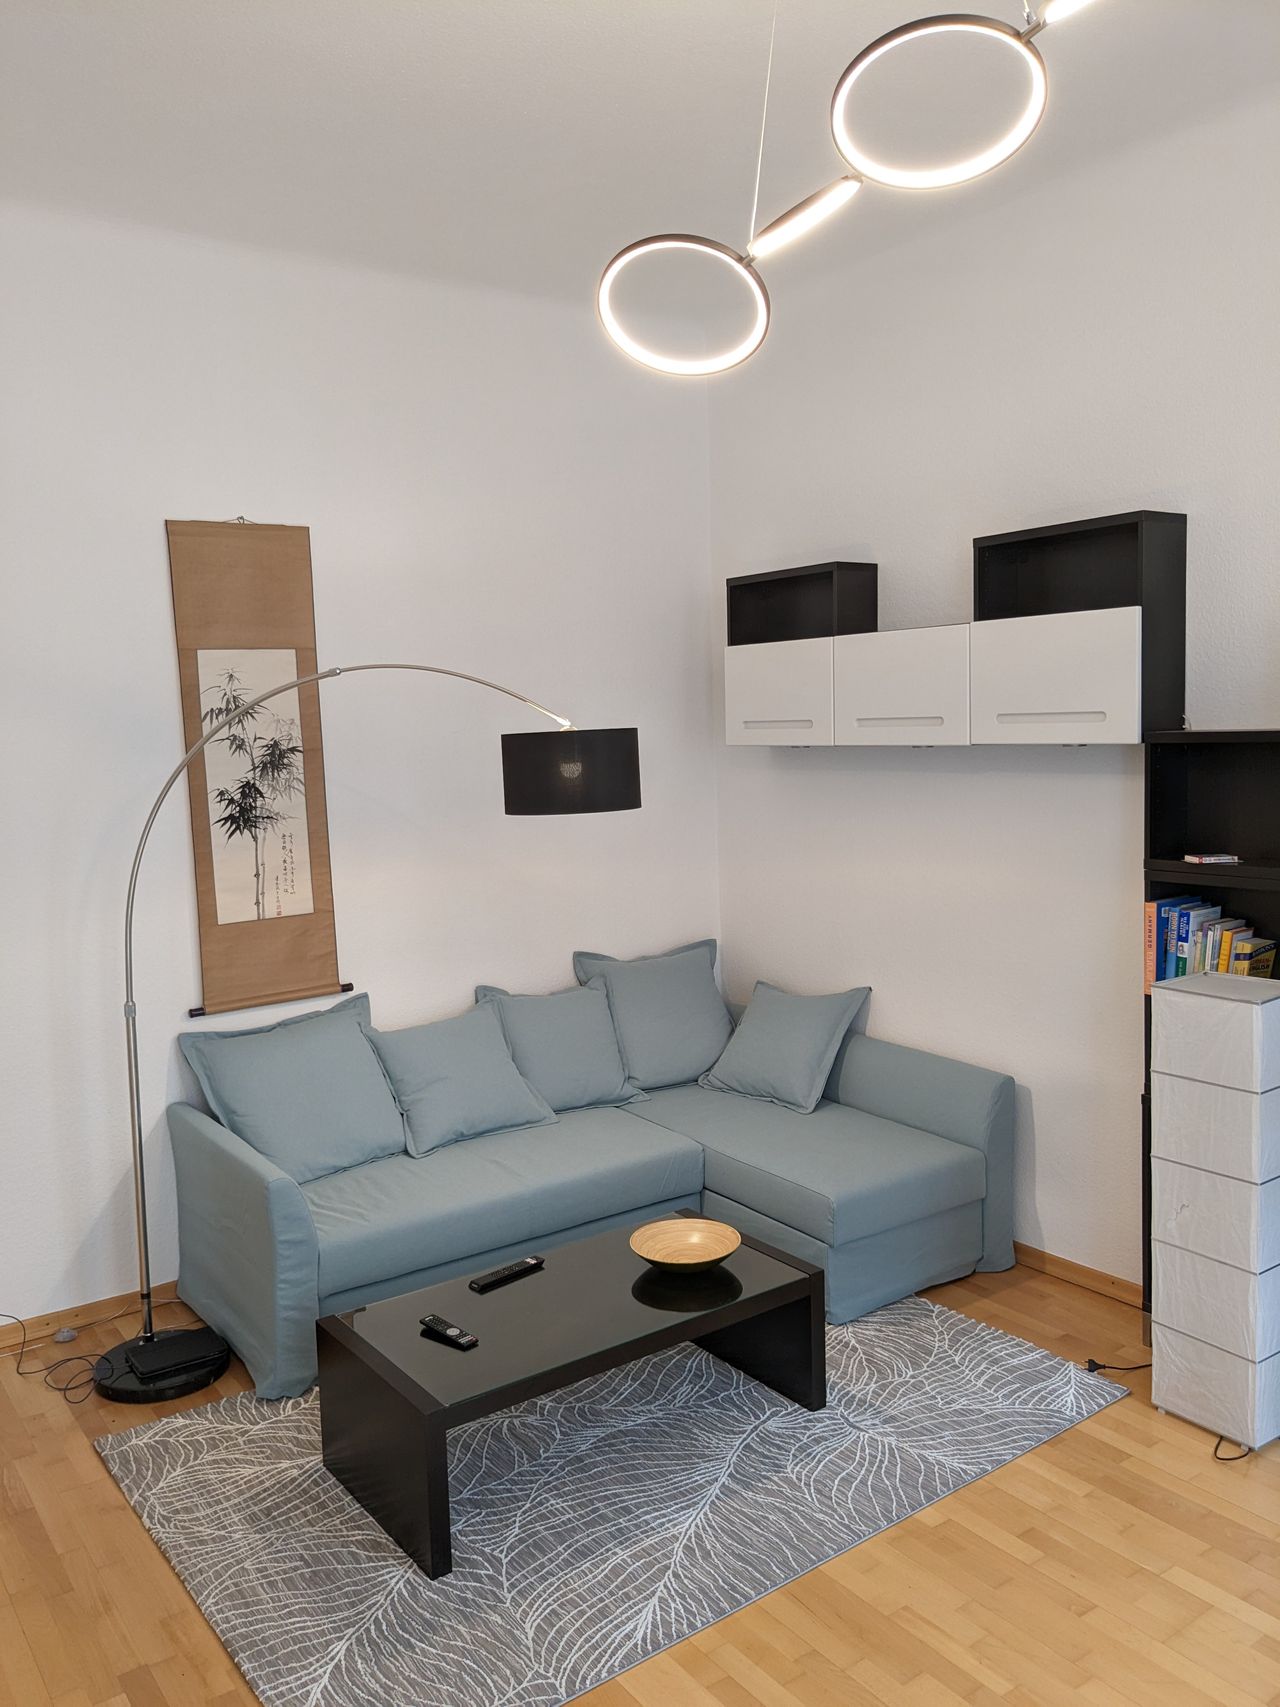 Bright, modern home in Mitte - live where others stay for vacation